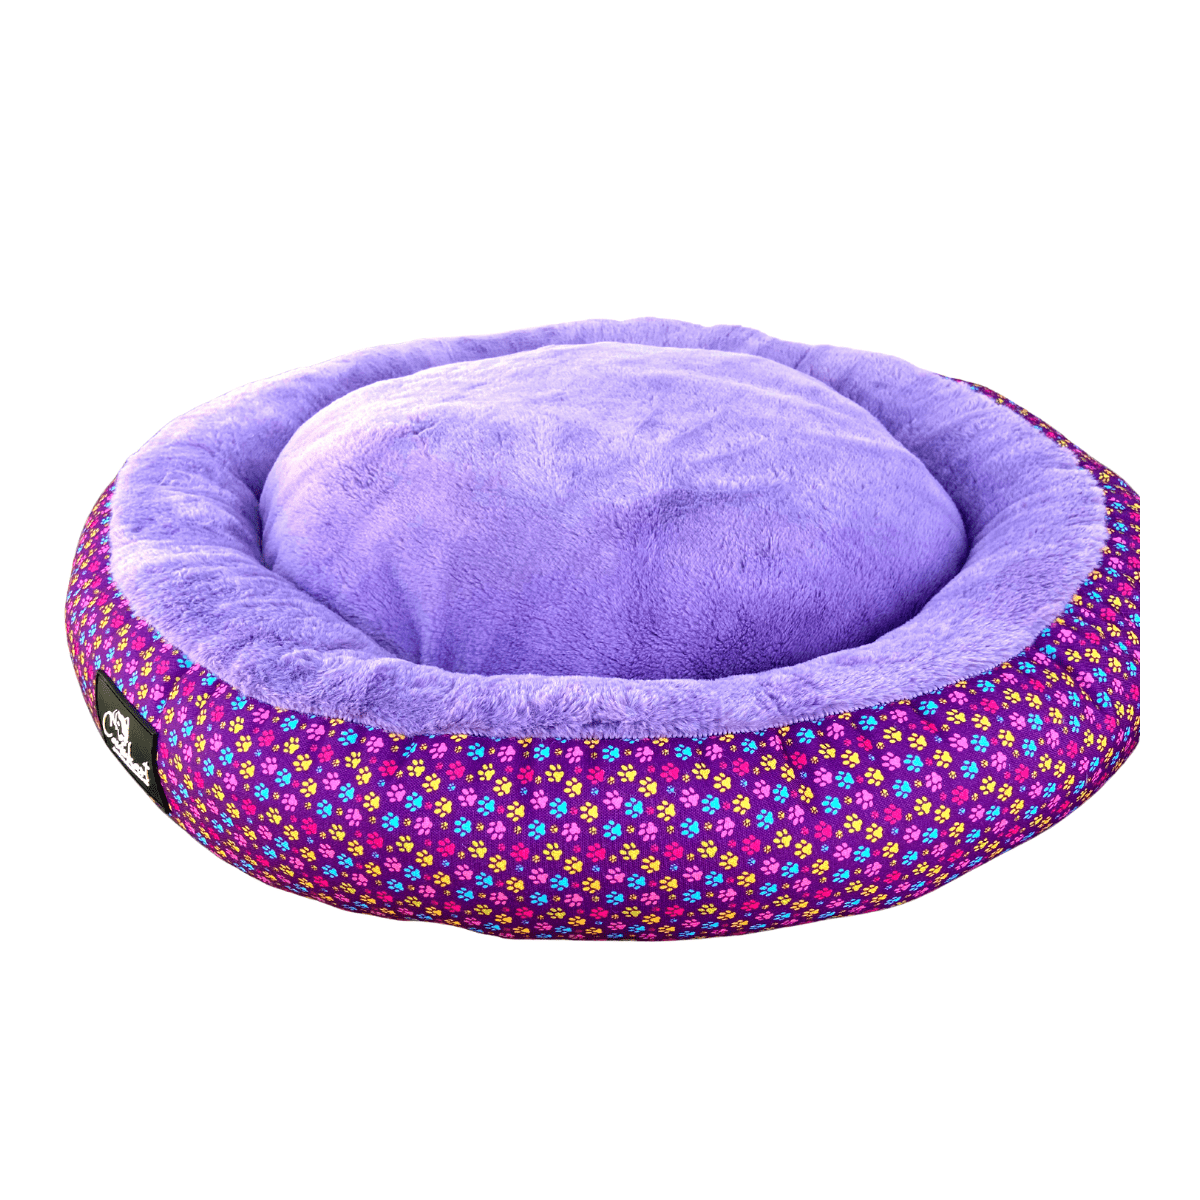 Caninkart Paws Premium Round Beds for Dogs and Cats (Lavender)